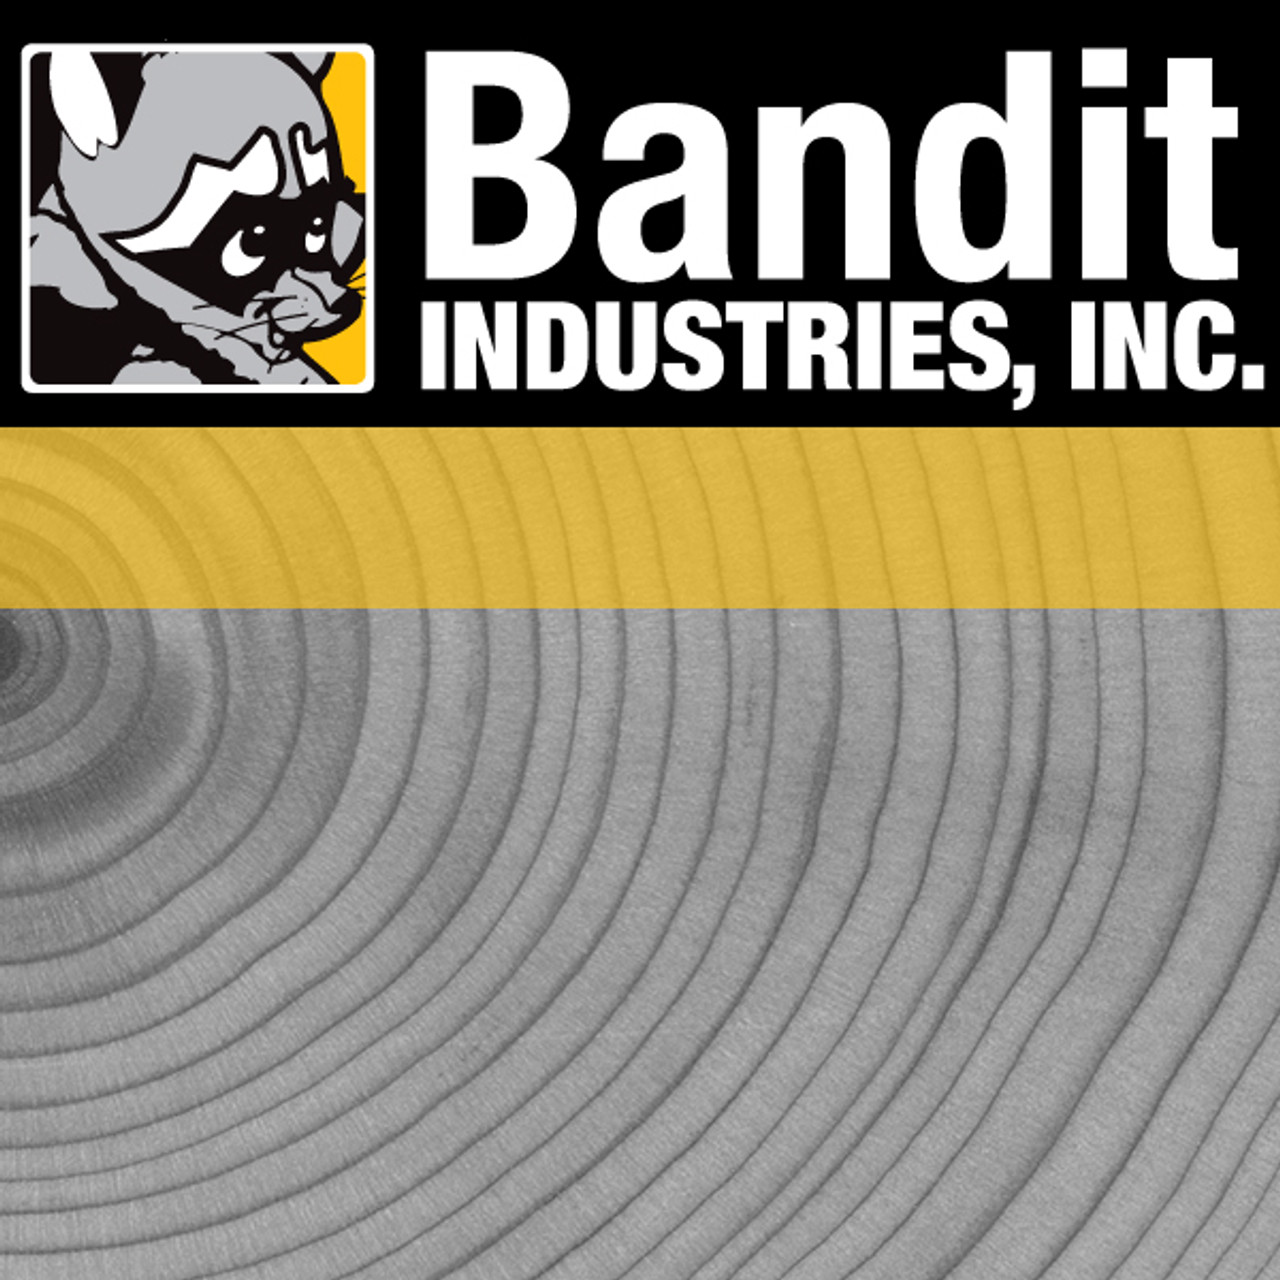 626-0001-36: BANDIT ANVIL M-60 NEW STYLE OFF CENTER W/ BOLTS 1"" W/PRINT